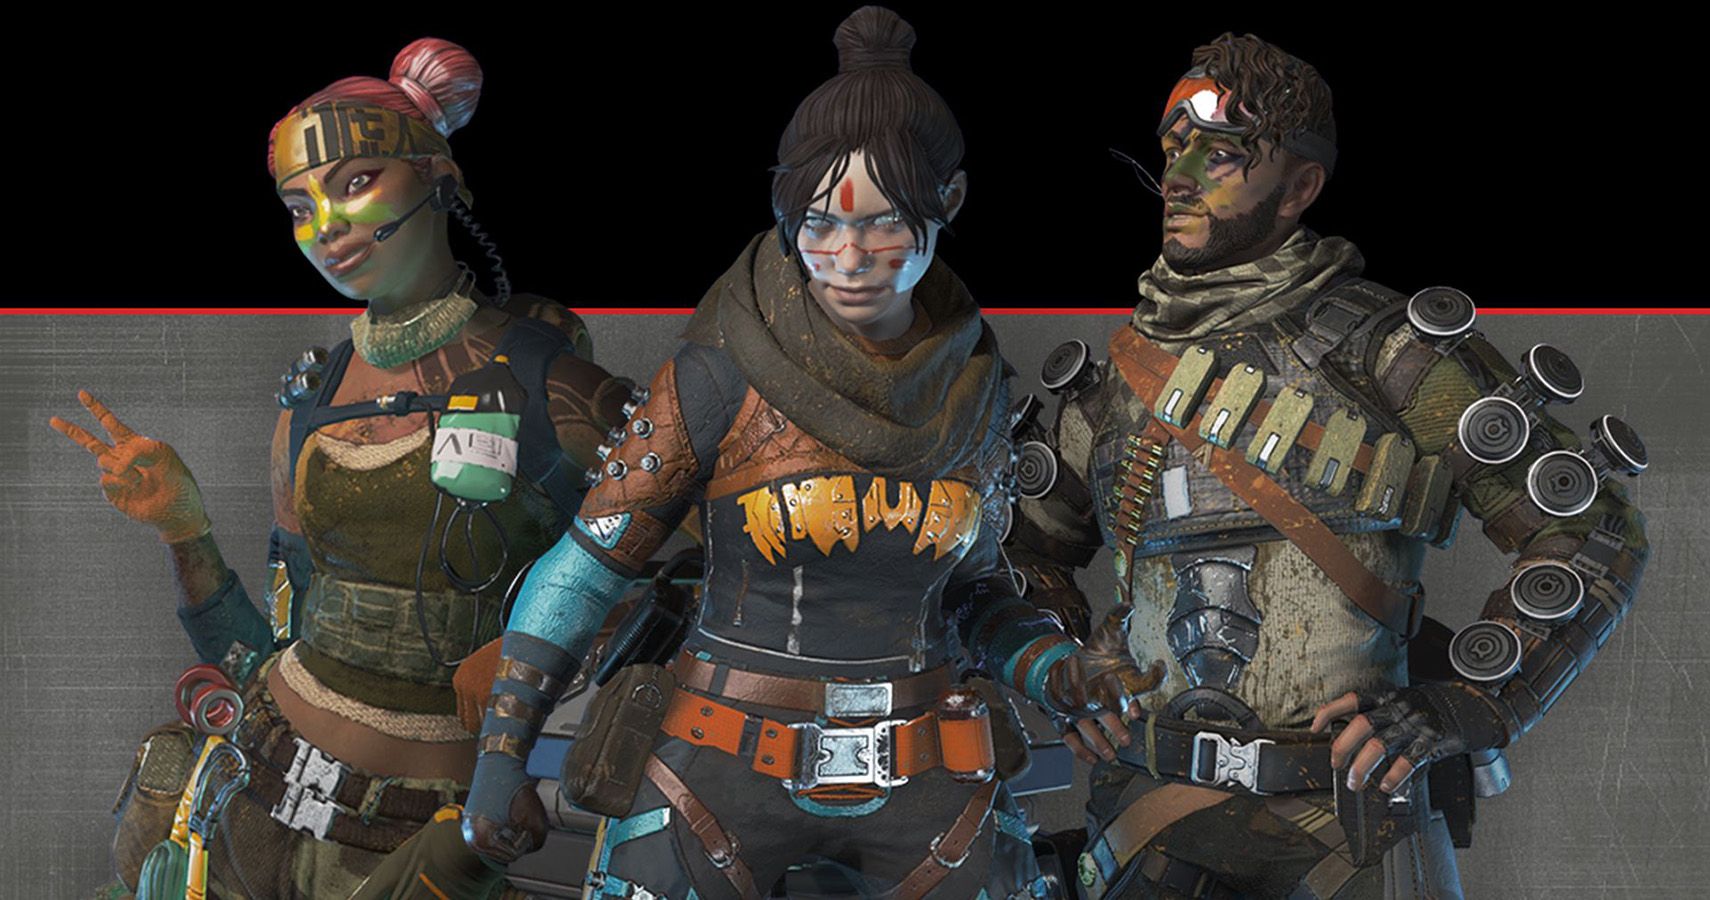 10 Things Teased About Apex Legends Season 1